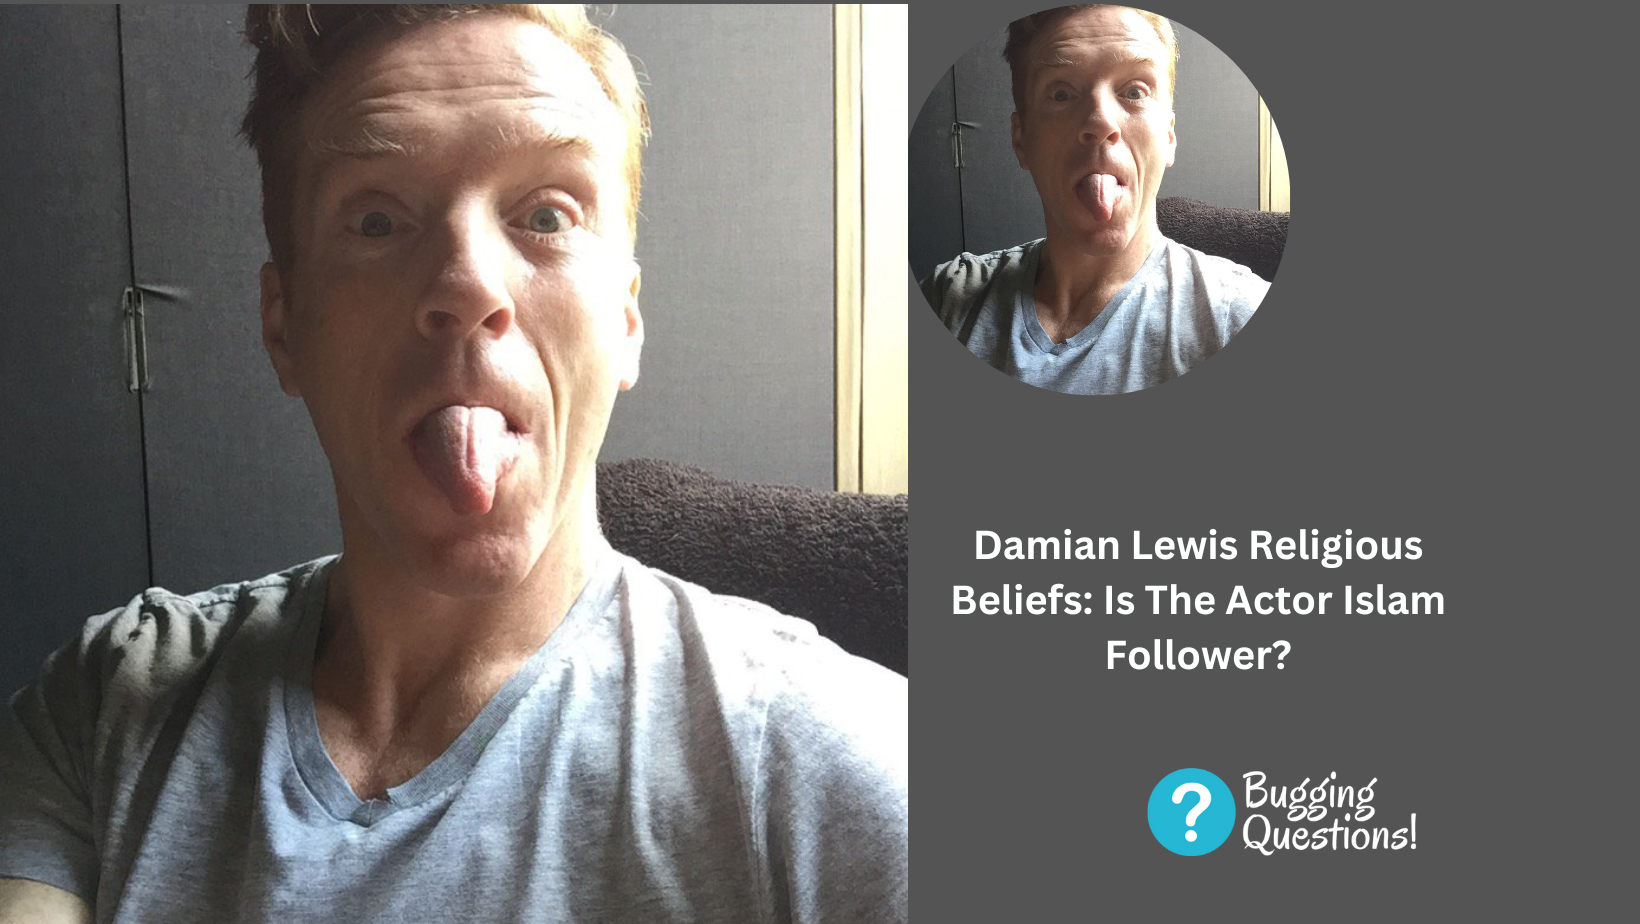 Damian Lewis Religious Beliefs: Is The Actor Islam Follower?